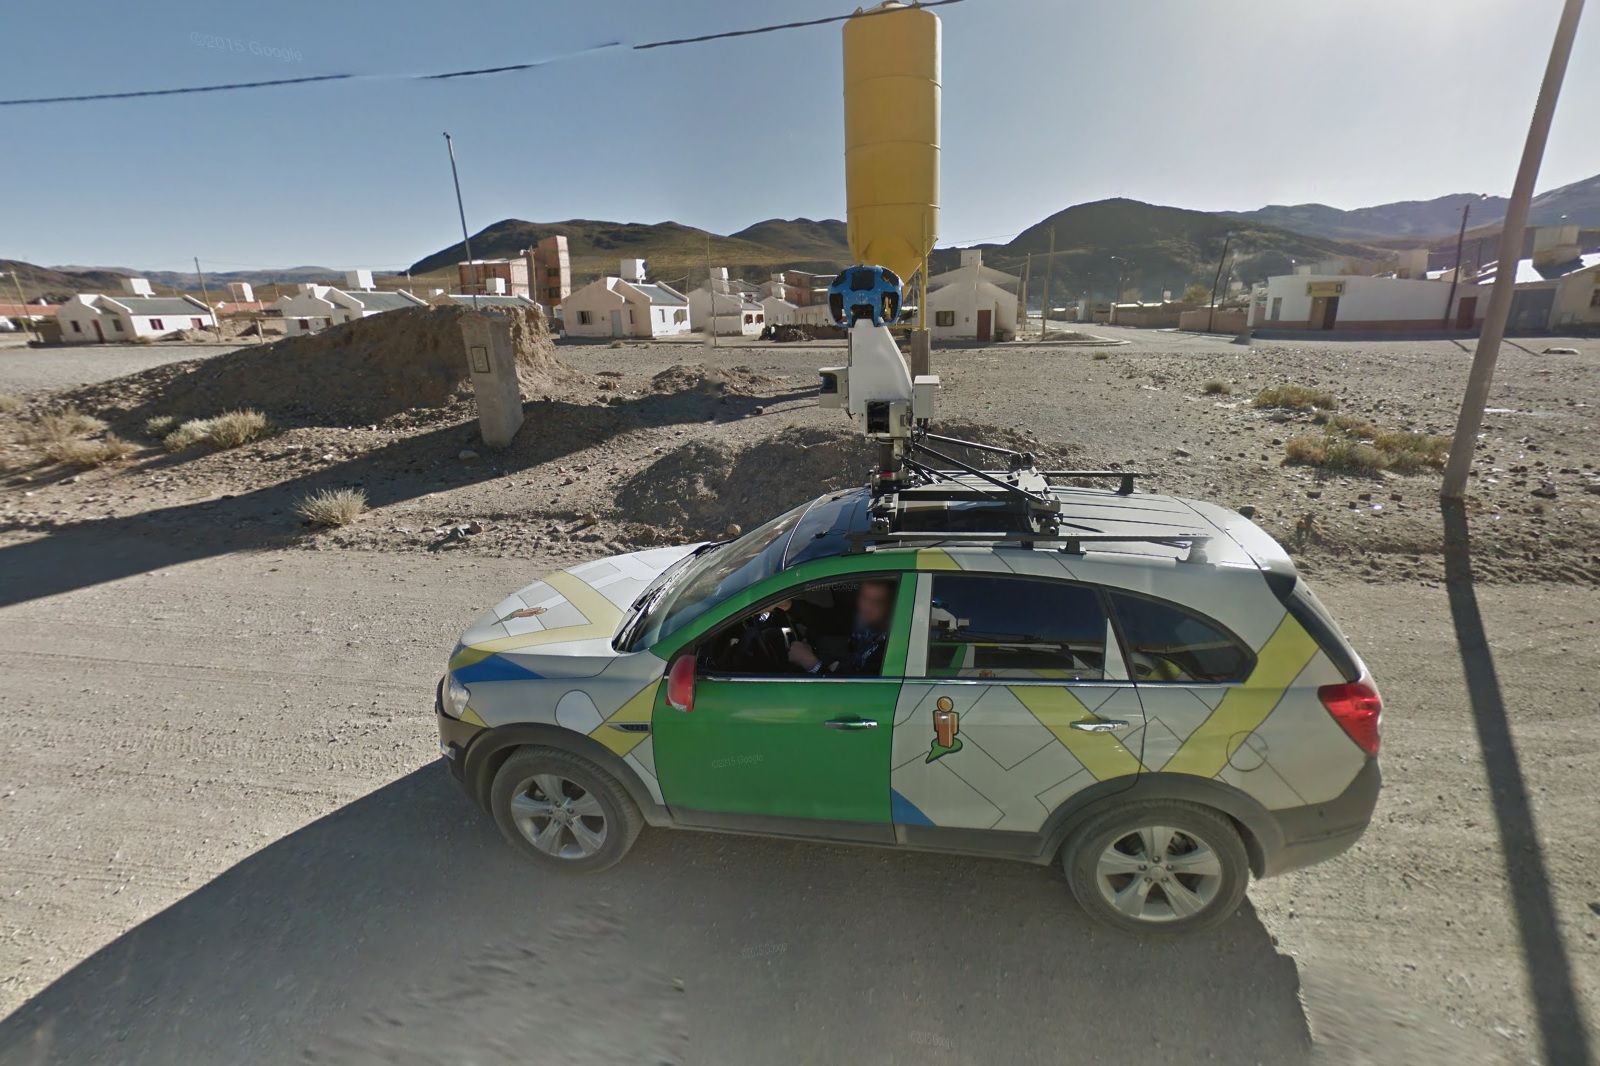 Brilliant views from around the world captured by Street View image 20